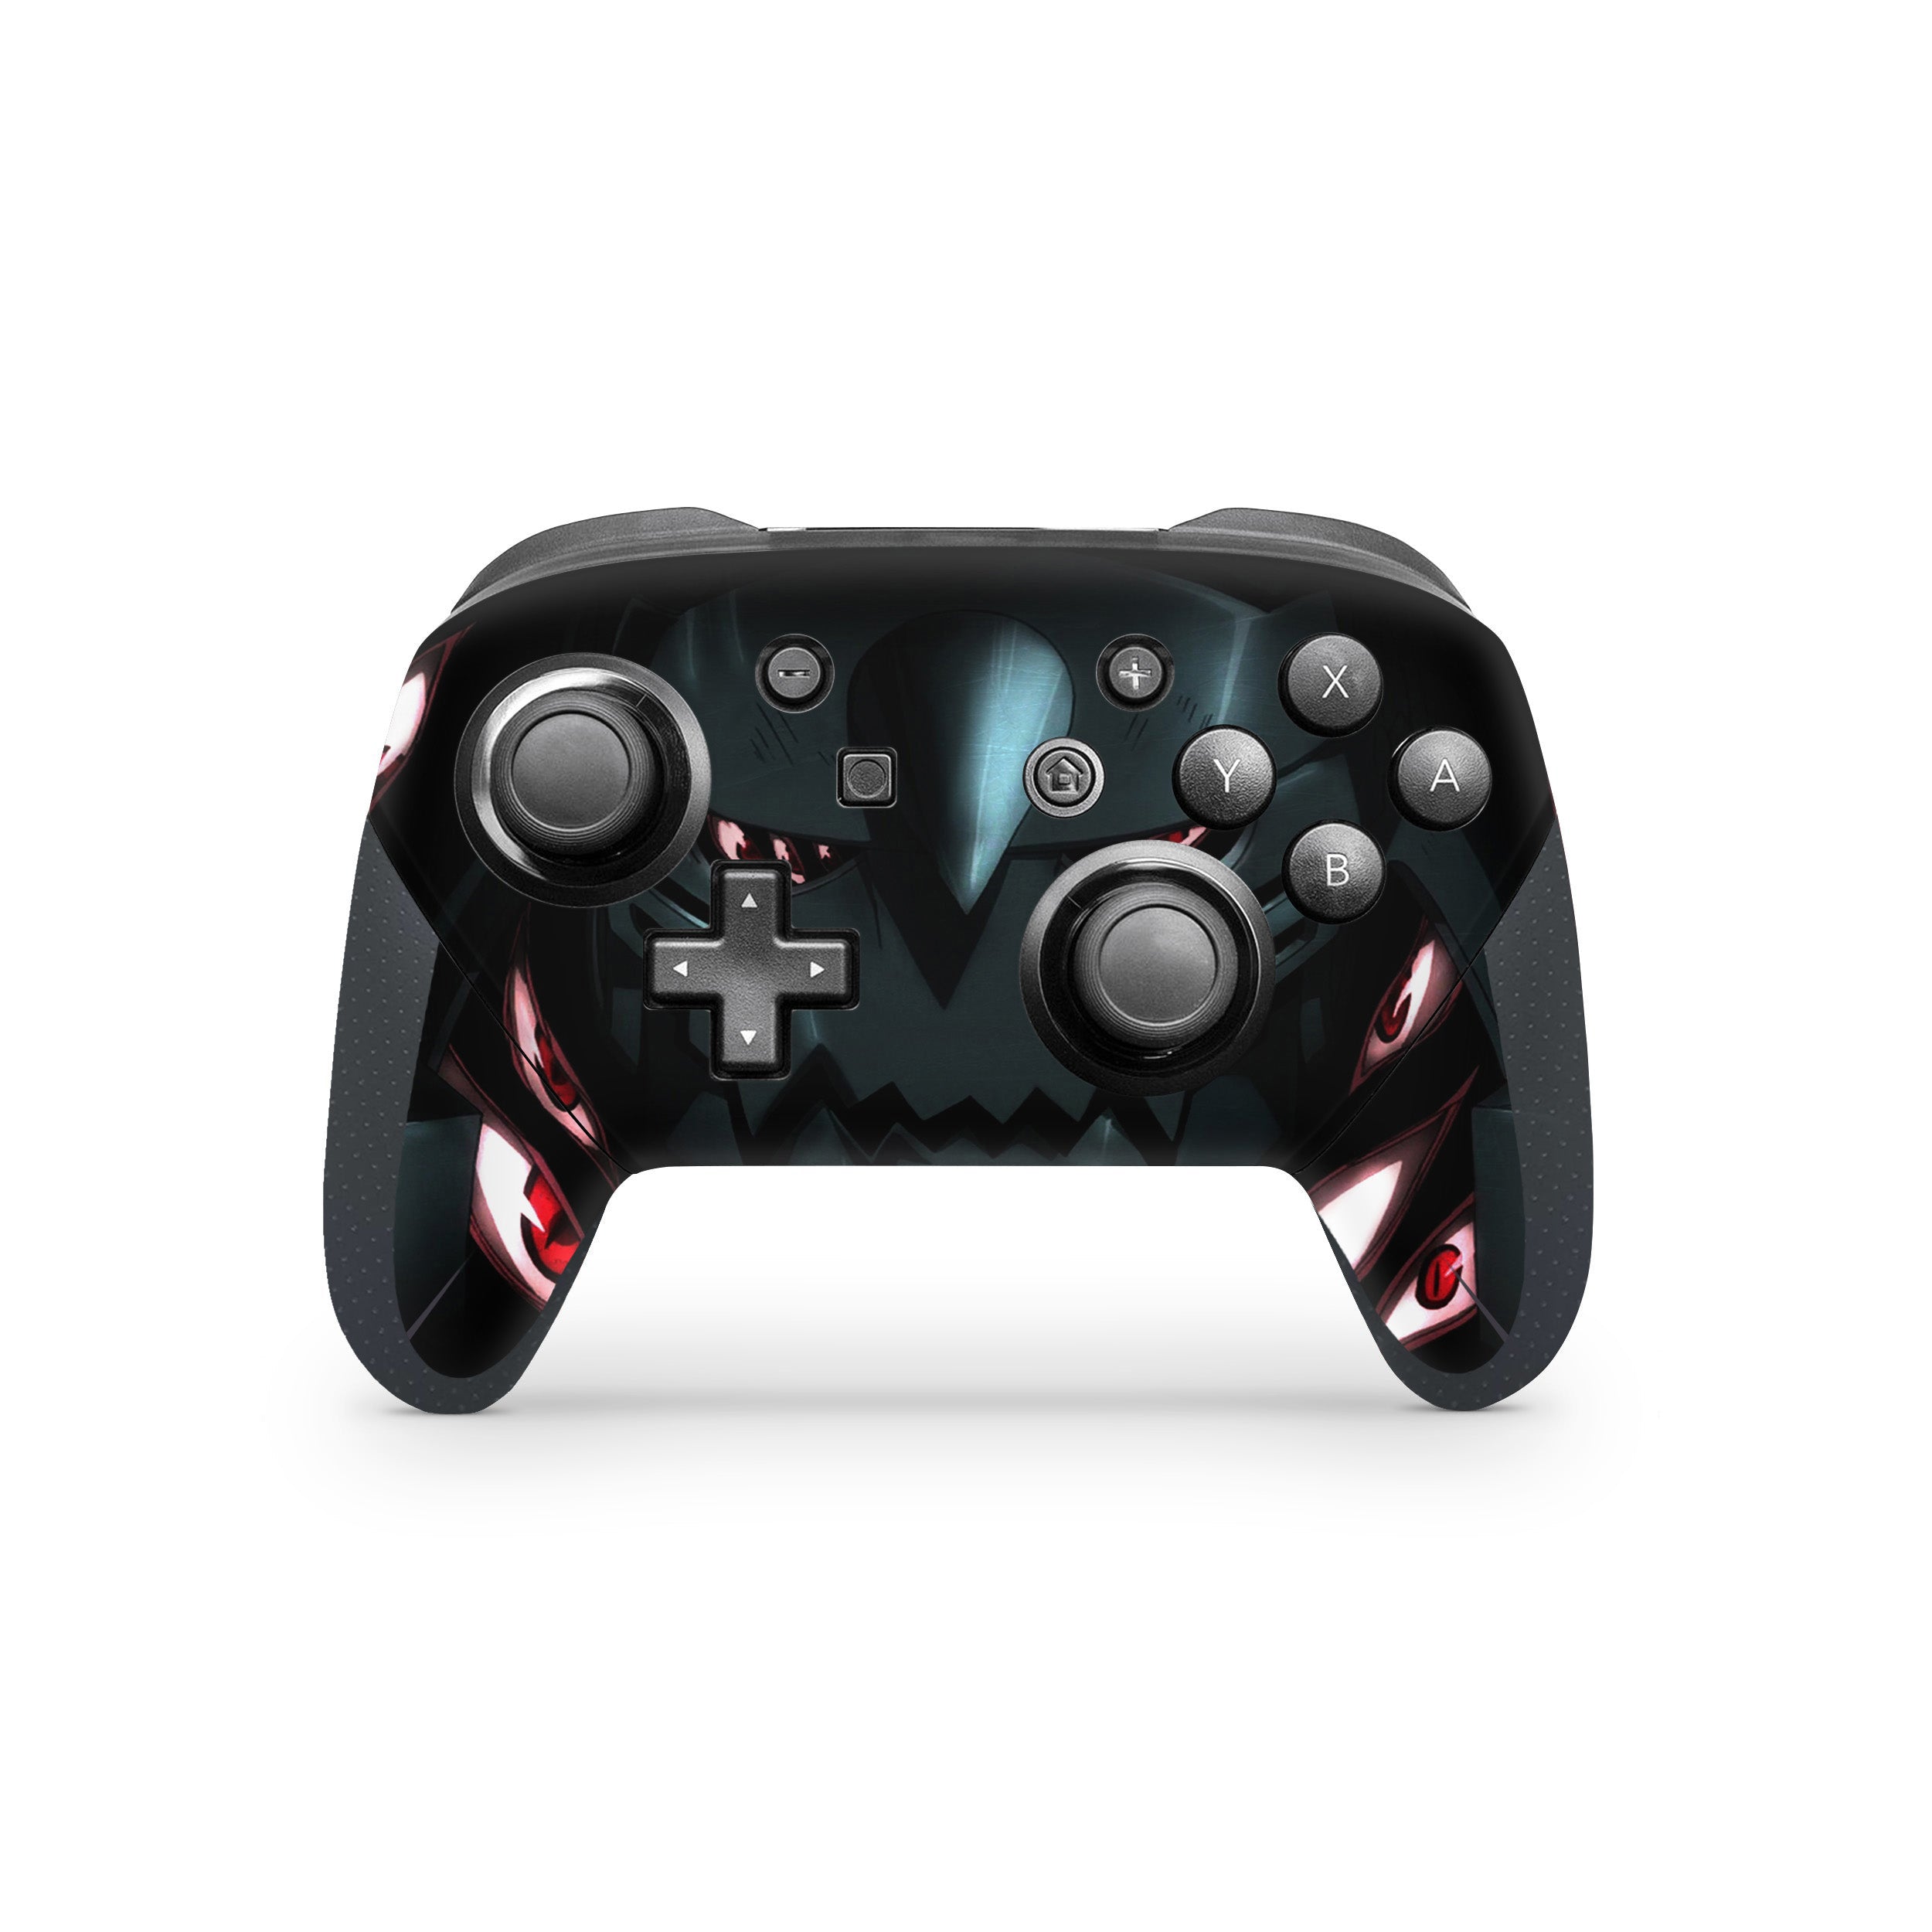 A video game skin featuring a Fullmetal Alchemist Alphonse Elric design for the Switch Pro Controller.